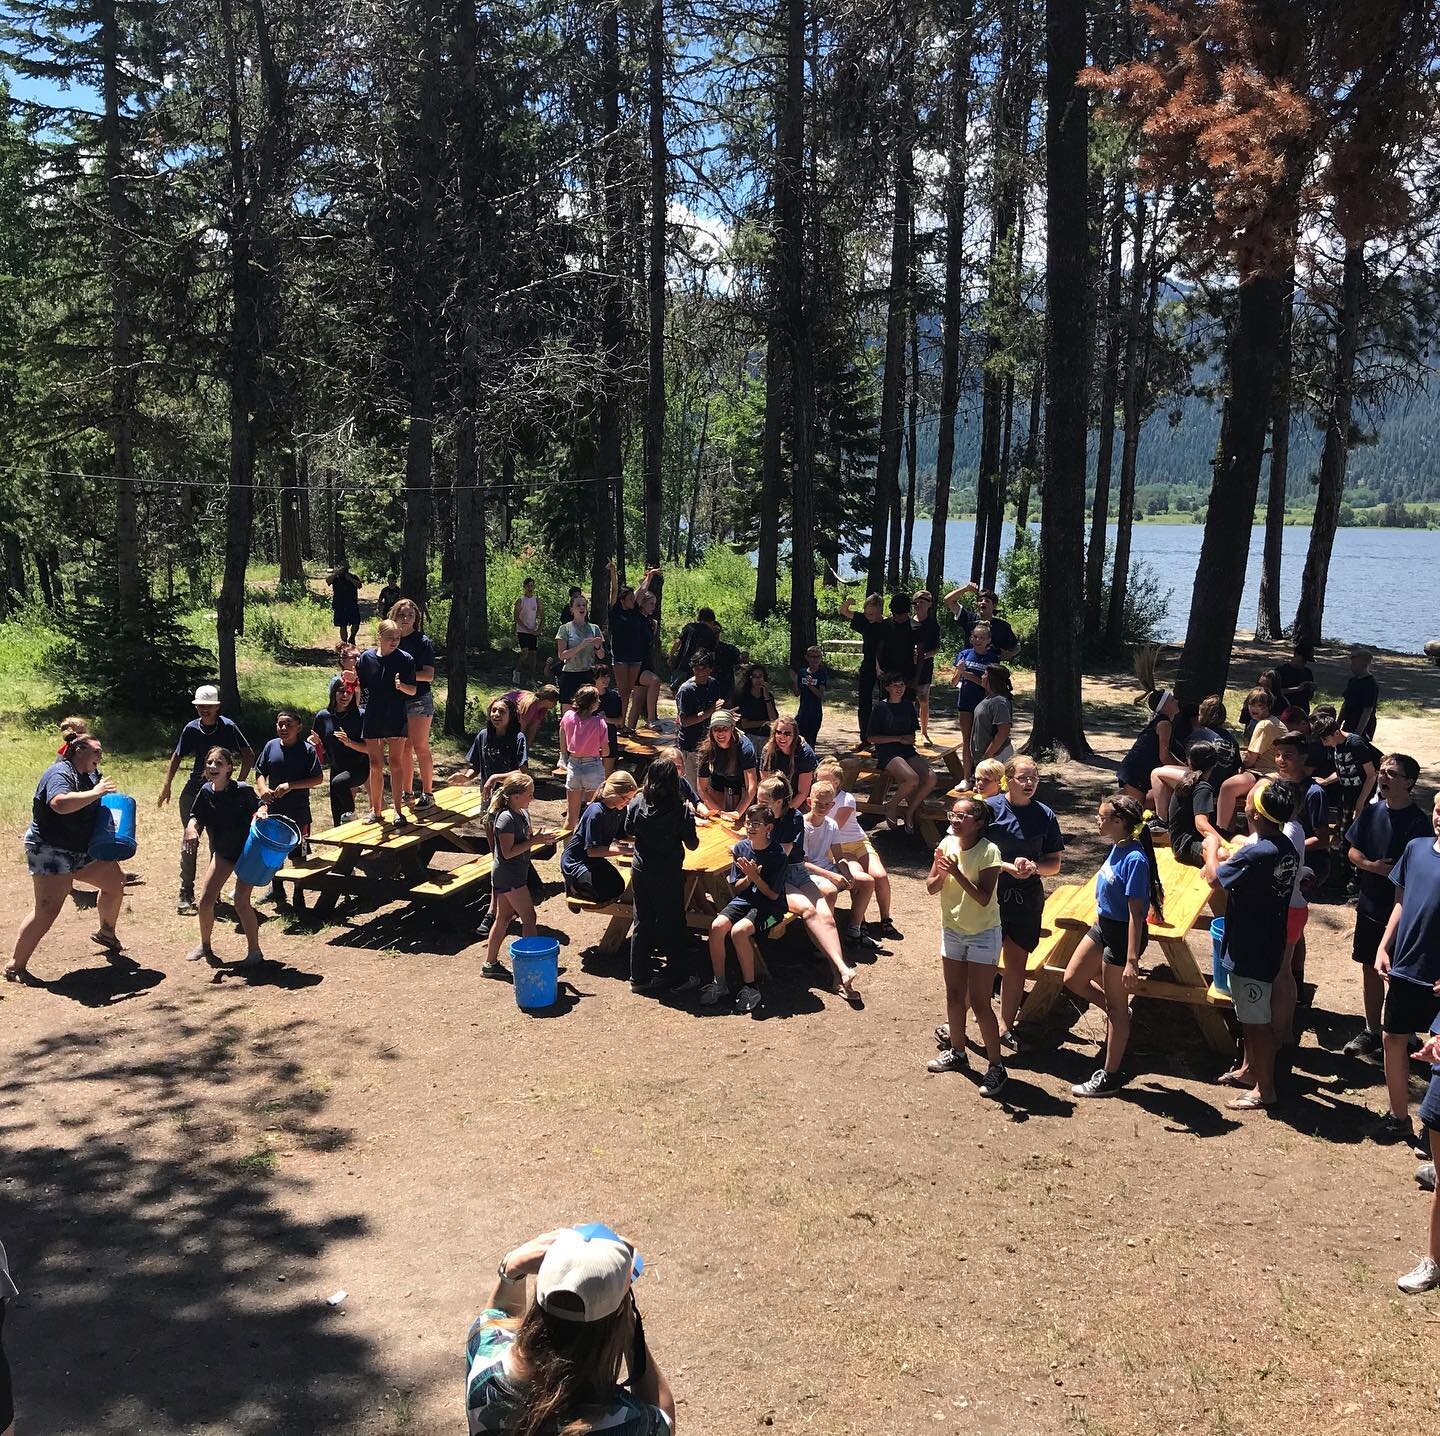 Summer camps are the best!! #idahoretreat #summercamp #idahosummercamp #christiancamp #christianretreats #christianretreats #donnellyidaho #mountainretreat